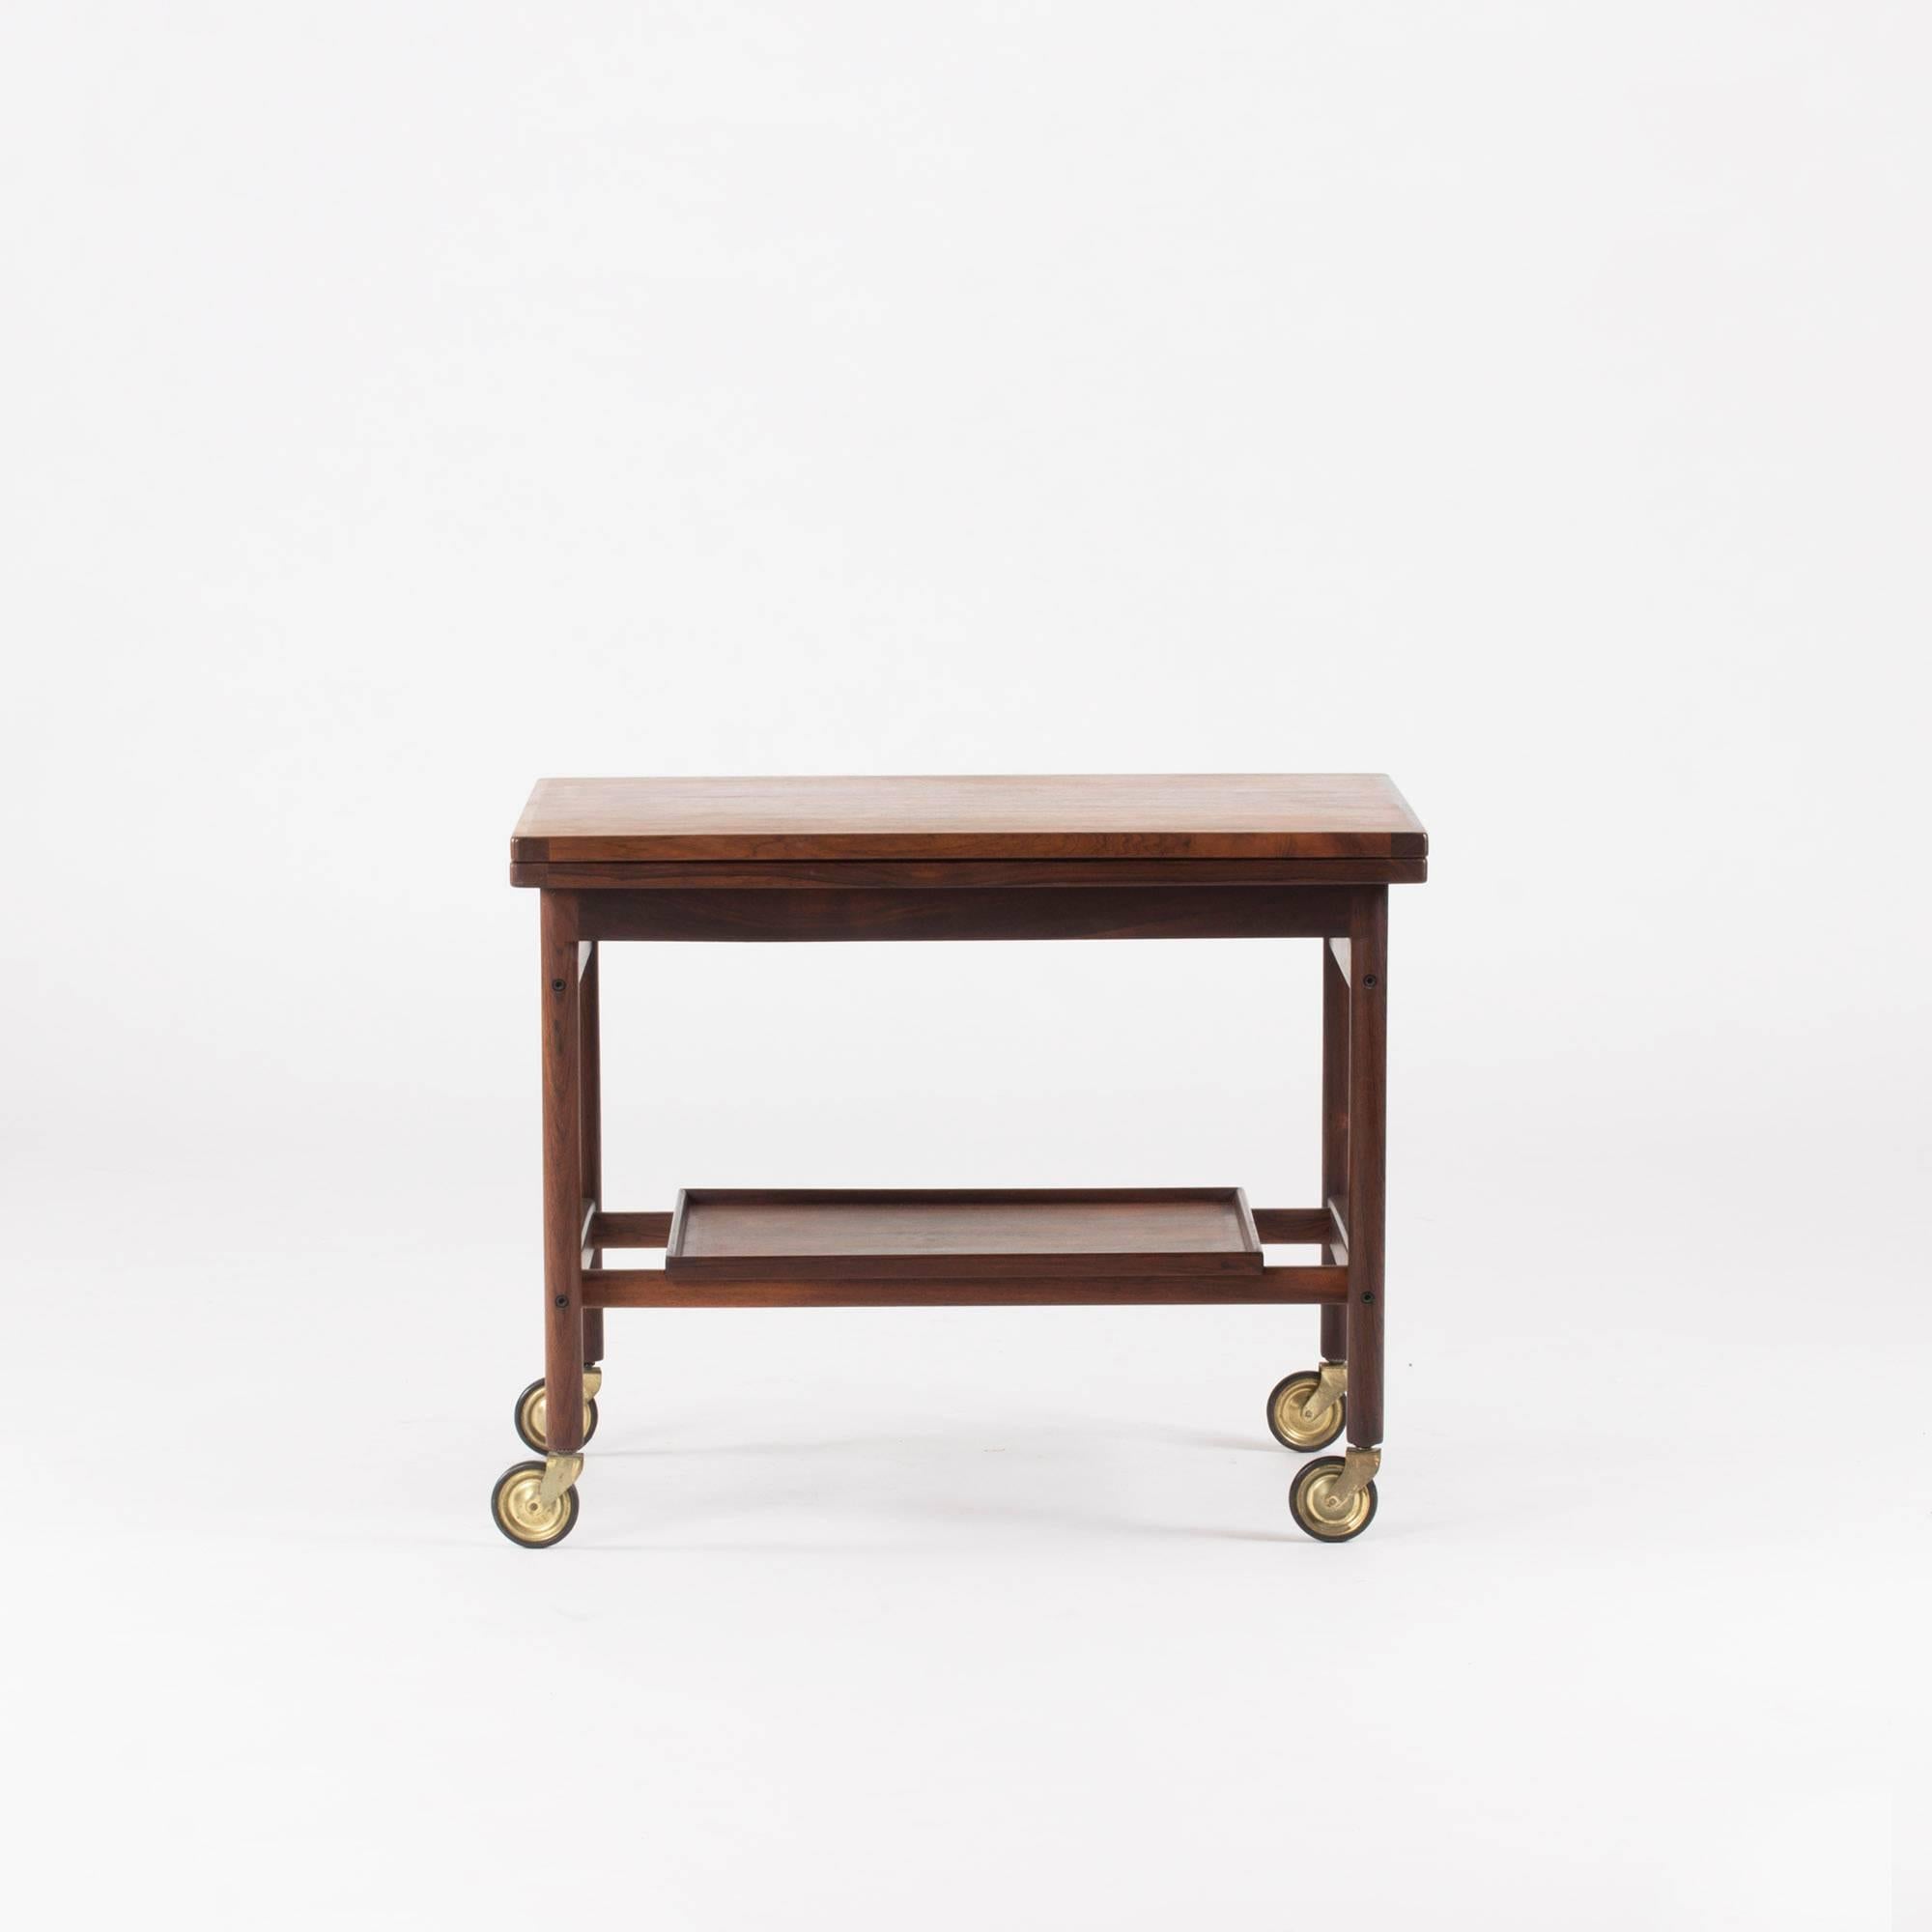 Elegant rosewood bar trolley by Kurt Østervig with a table top that folds up to become double length. The inside is covered with black formica. Removable tray underneath the top with a beautiful pattern in the rosewood. Brass wheels.

Length when